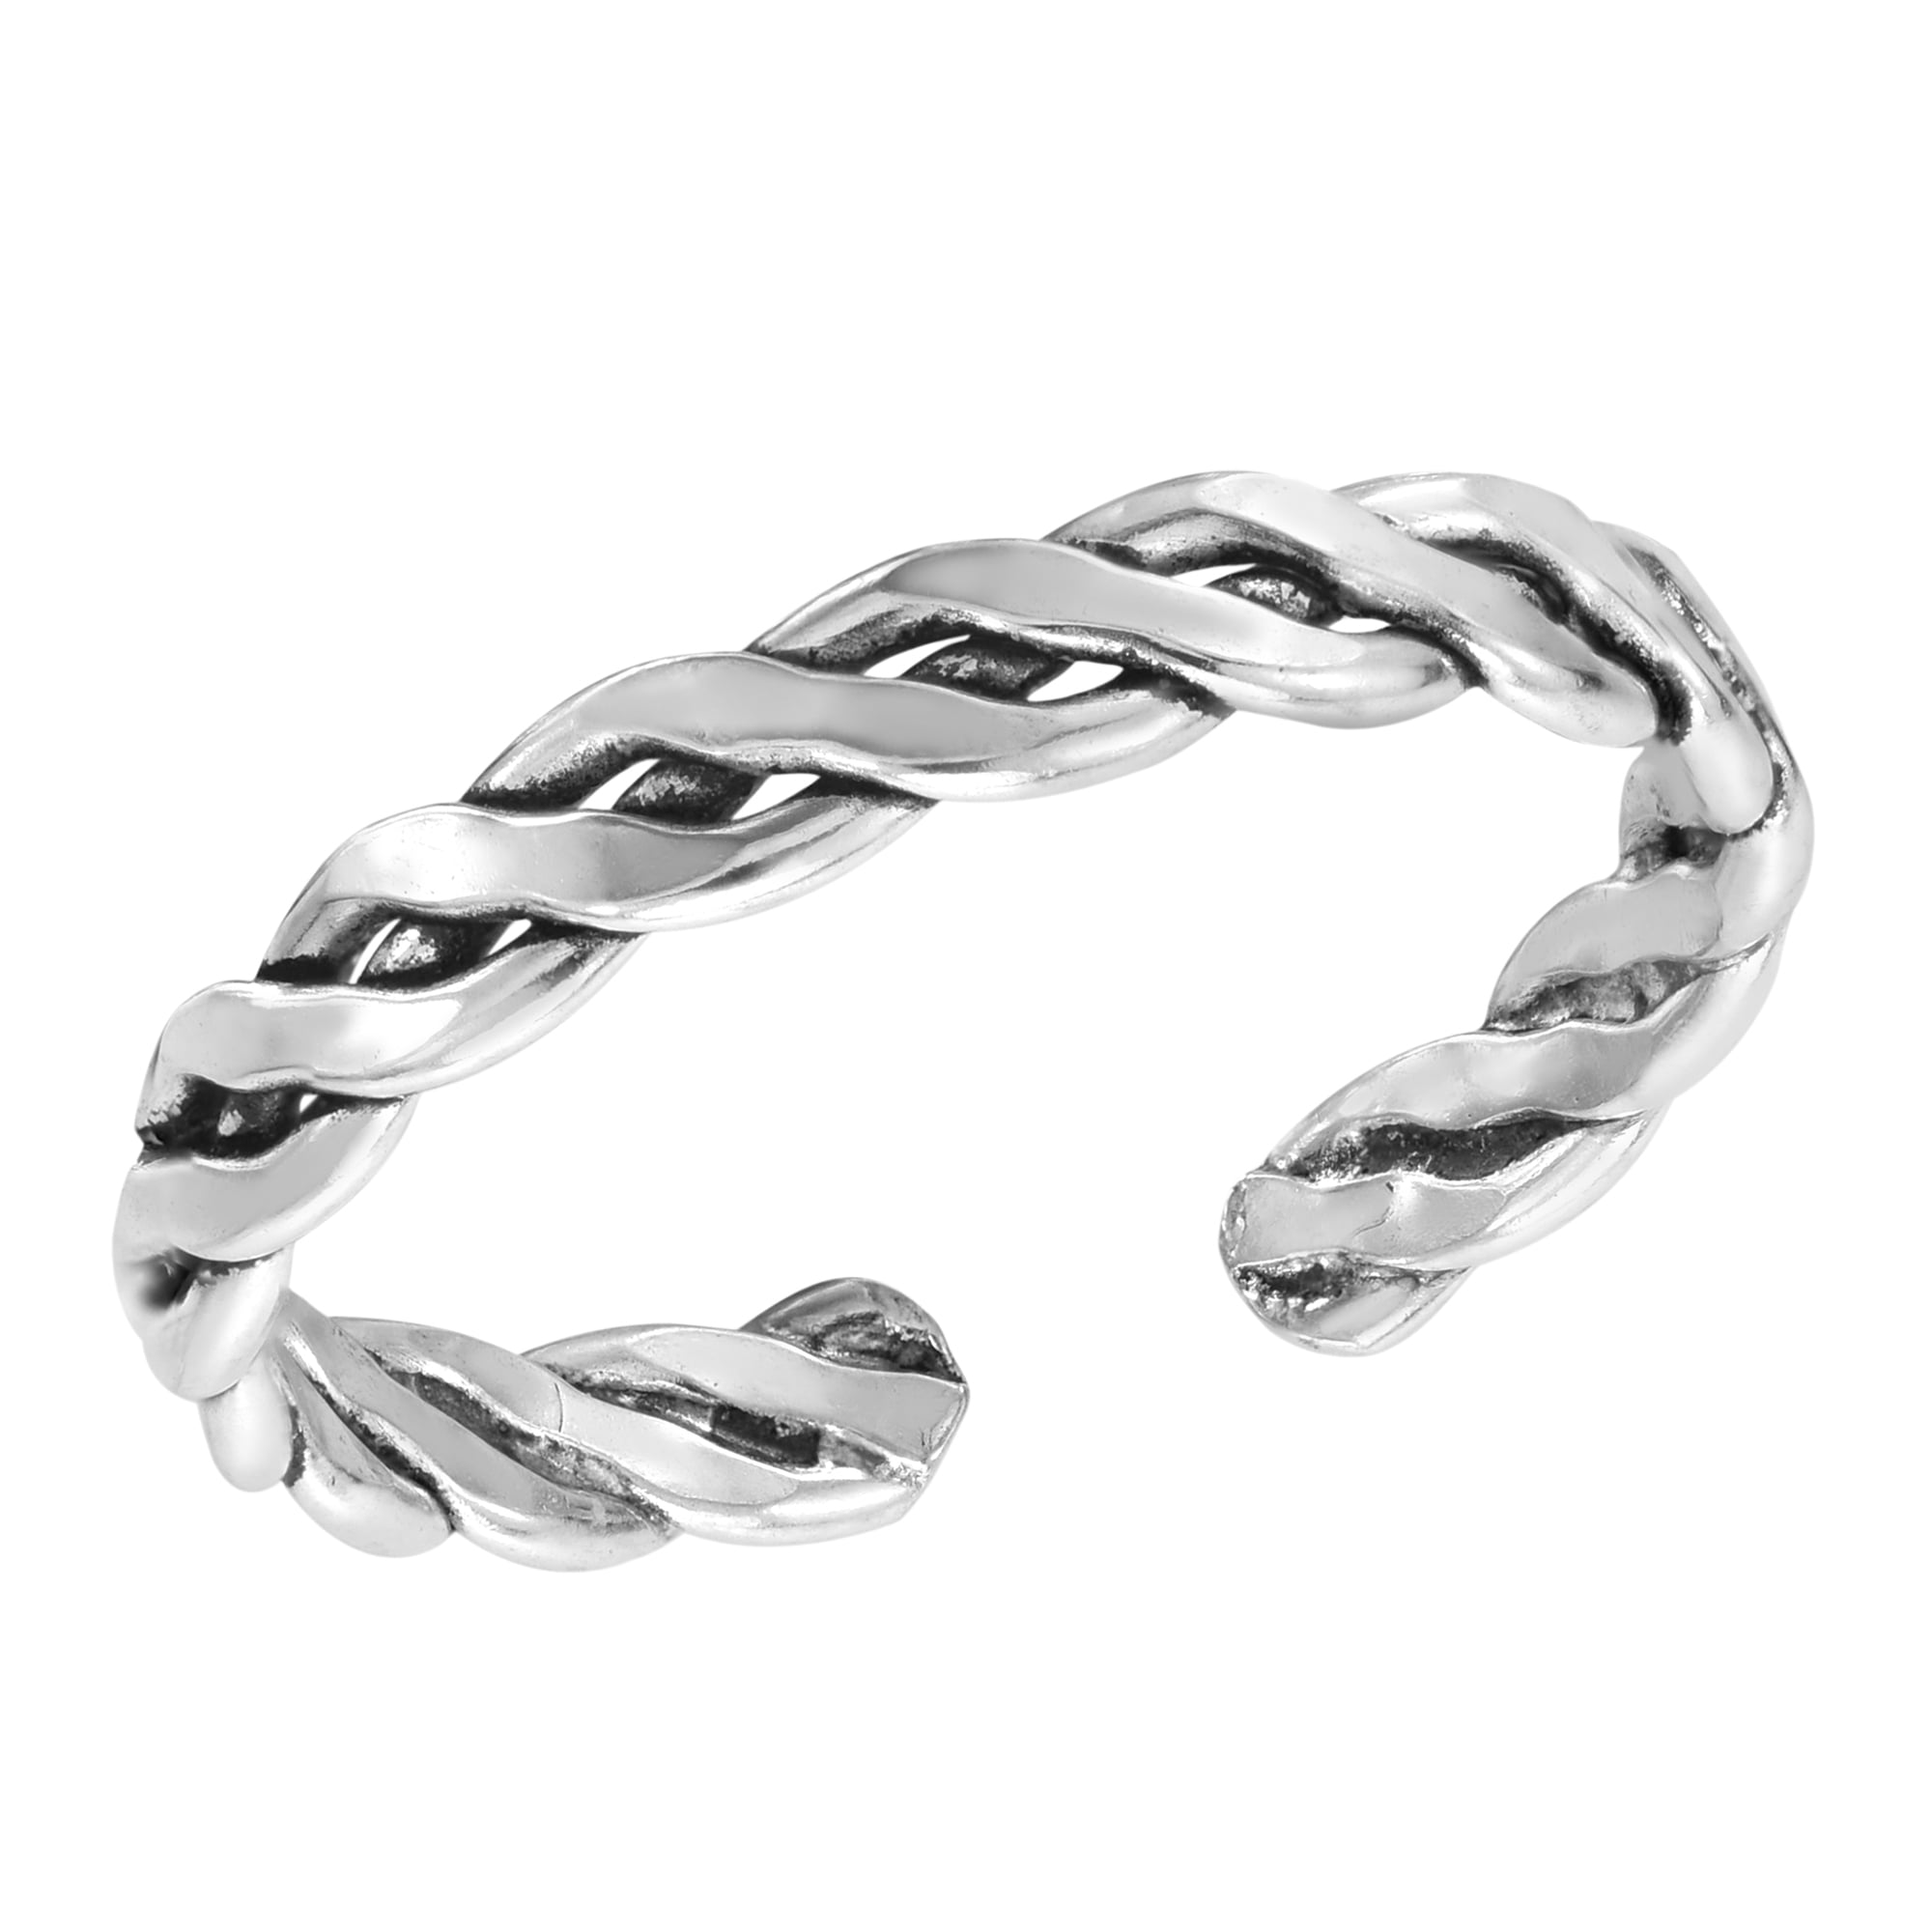 Braid Toe Ring Genuine Sterling Silver 925 Best Choice Jewelry Gift Width 6 mm 